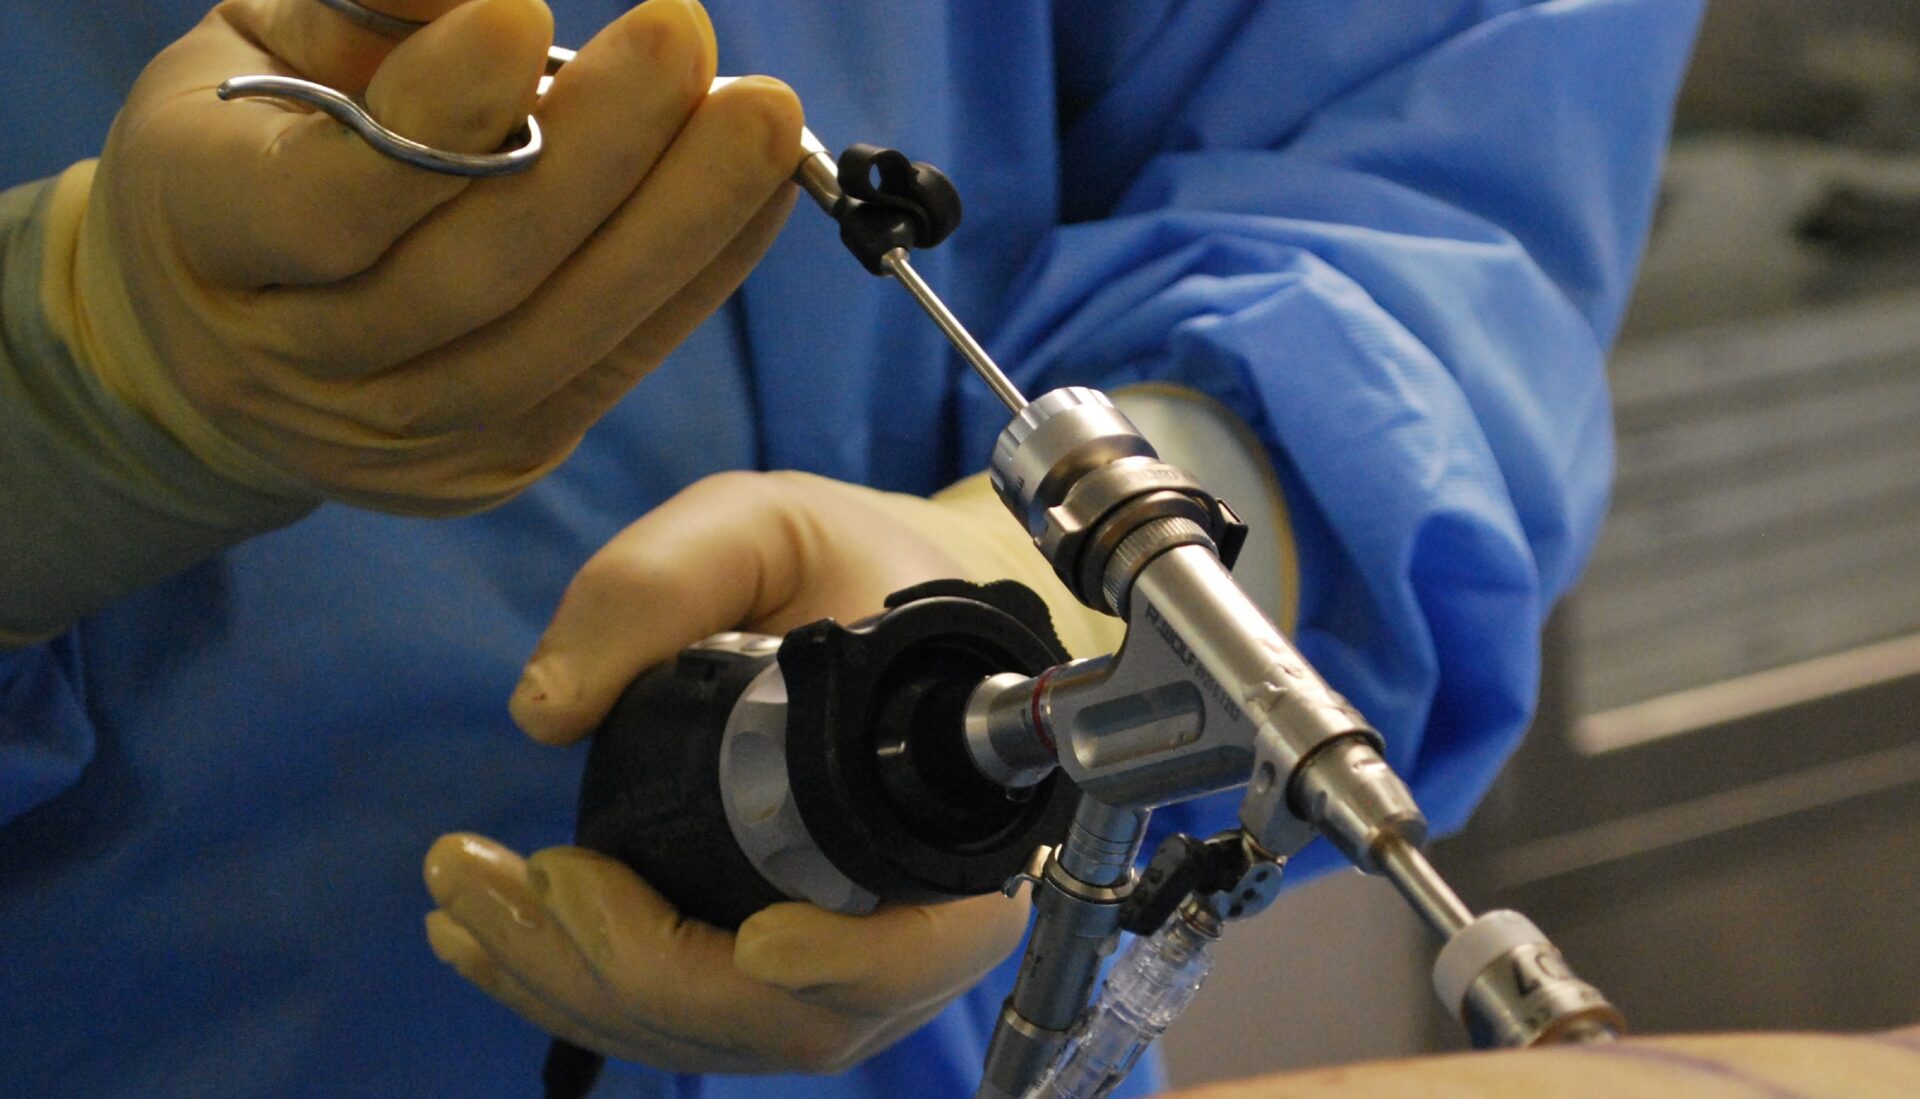 MicroEndoscopic Discectomy (MED) Endoscopic System Market: Trends, Innovations, and Growth Prospects